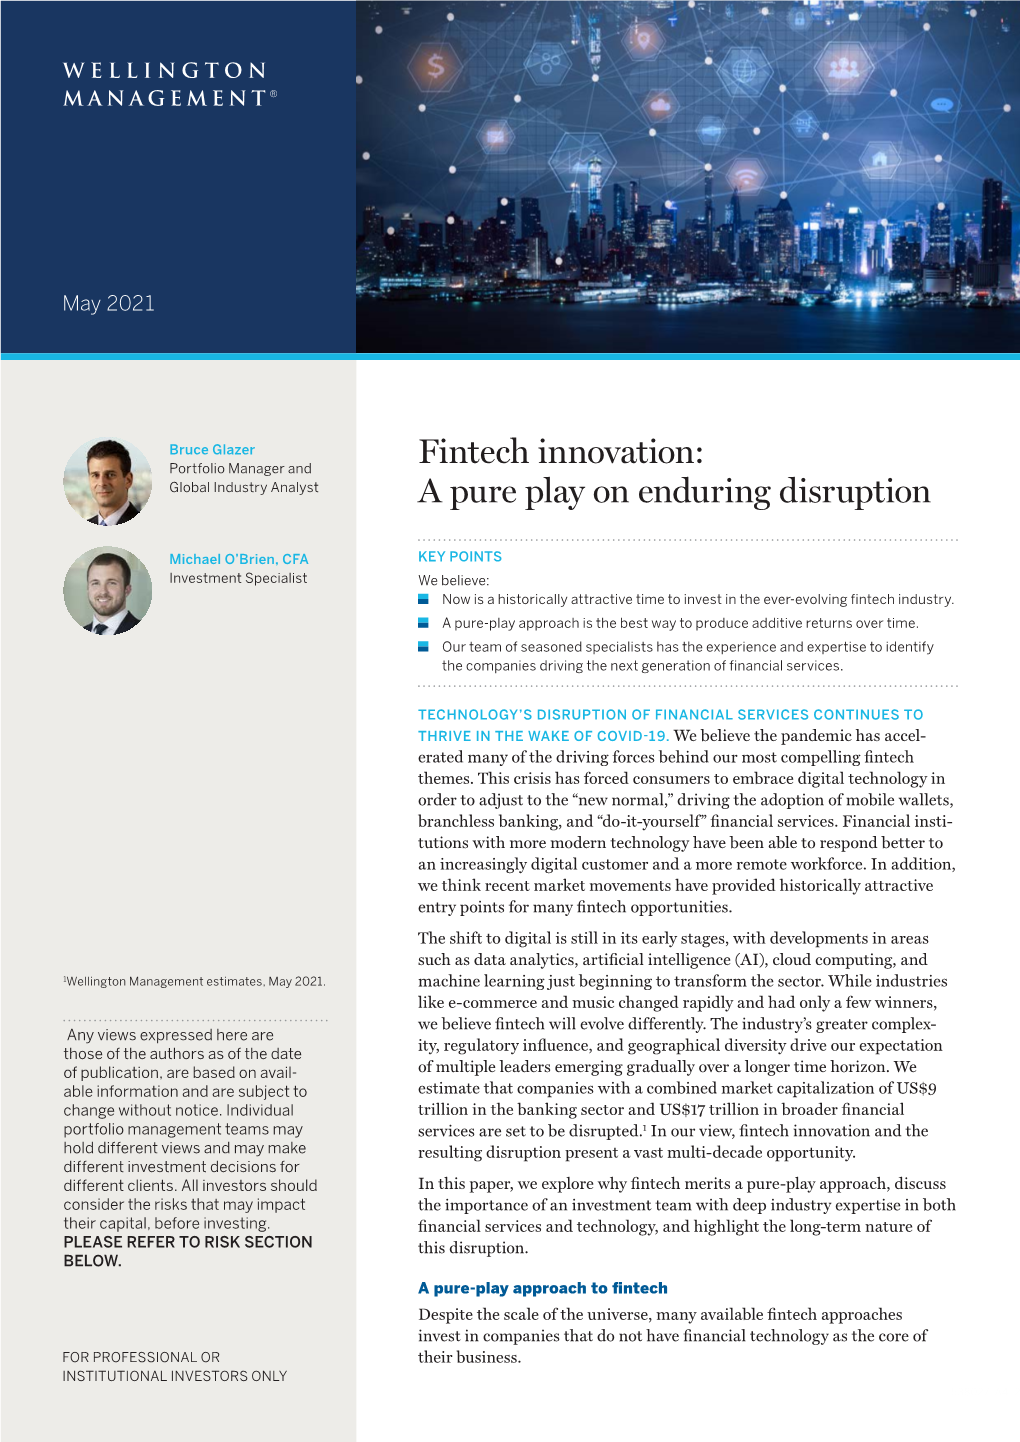 Fintech Innovation: a Pure Play on Enduring Disruption